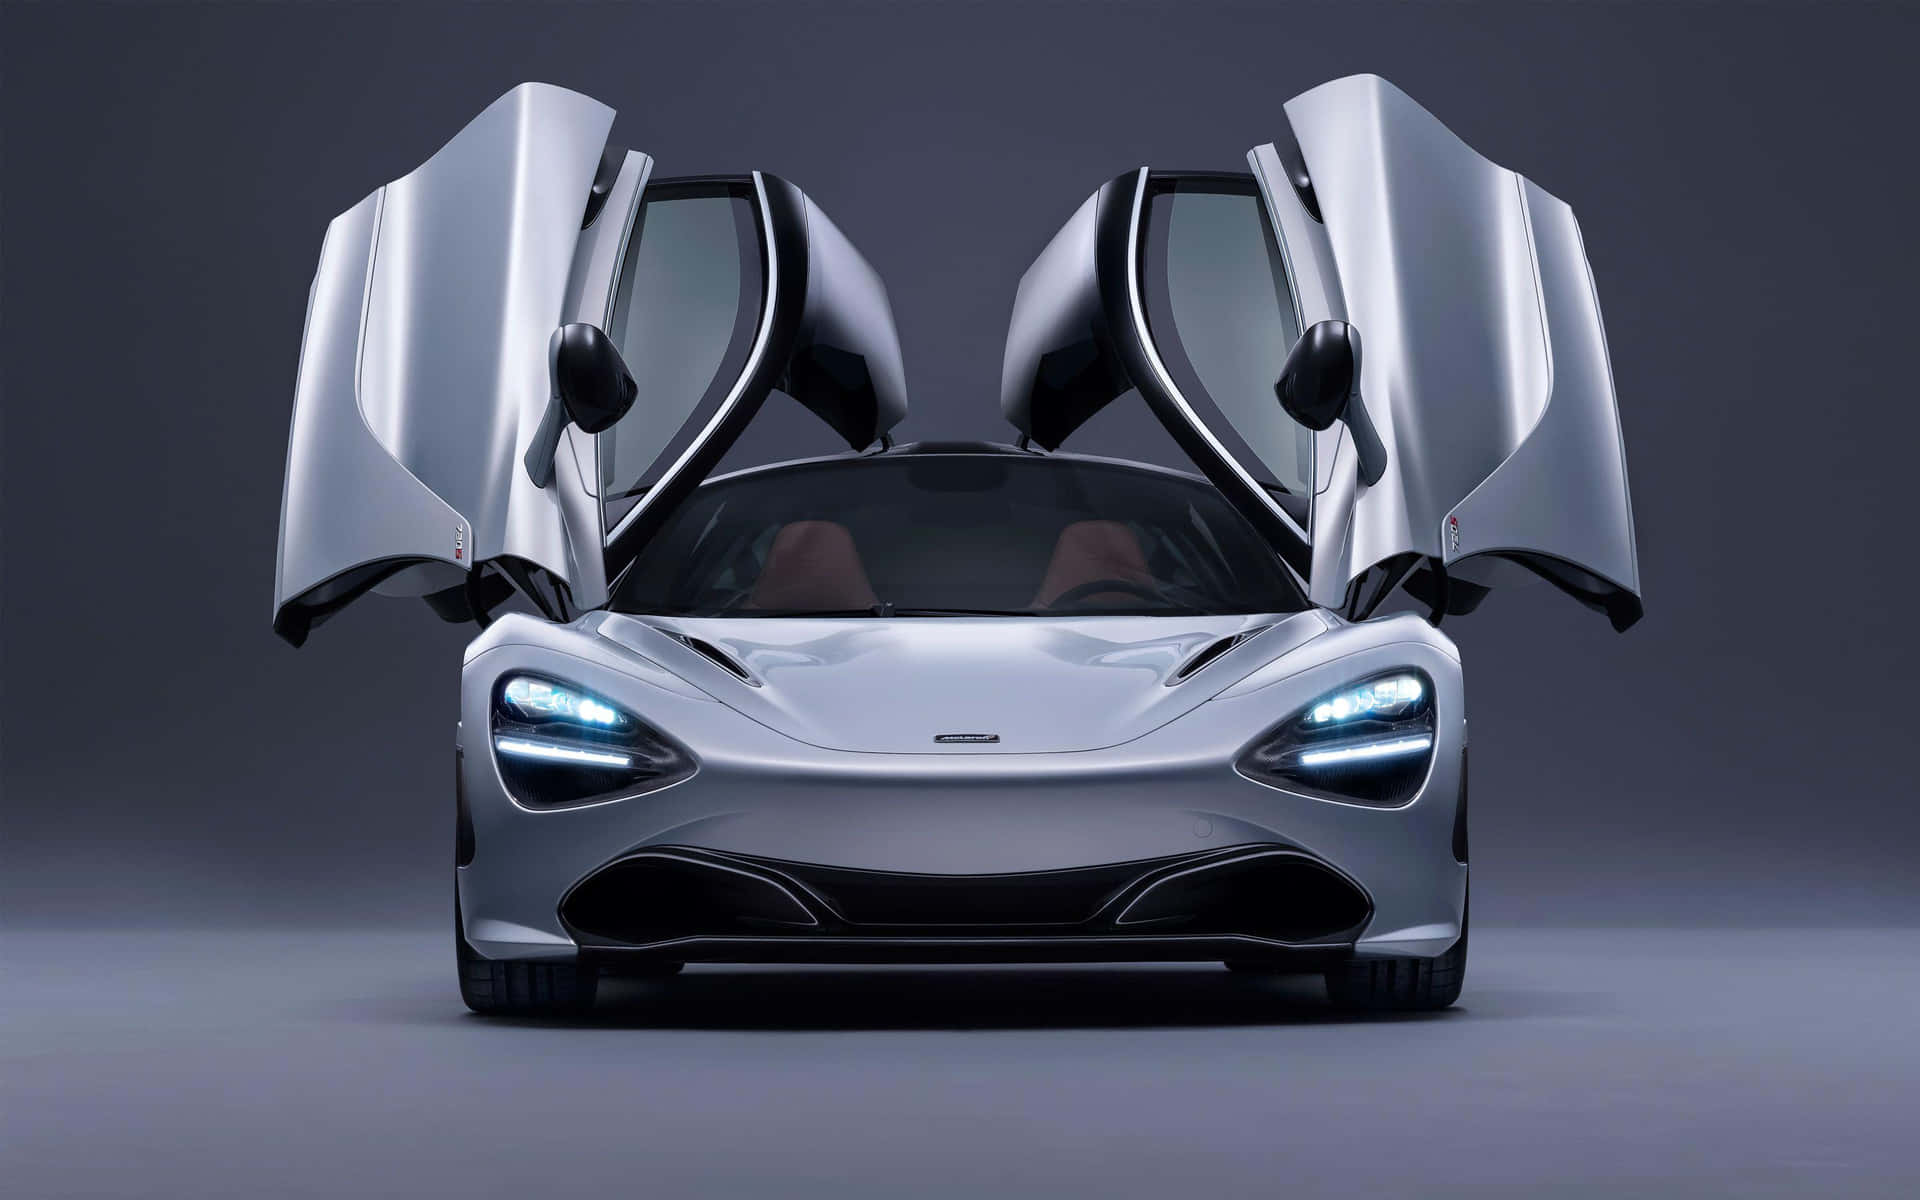 The Speed and Style of the Mclaren 720s